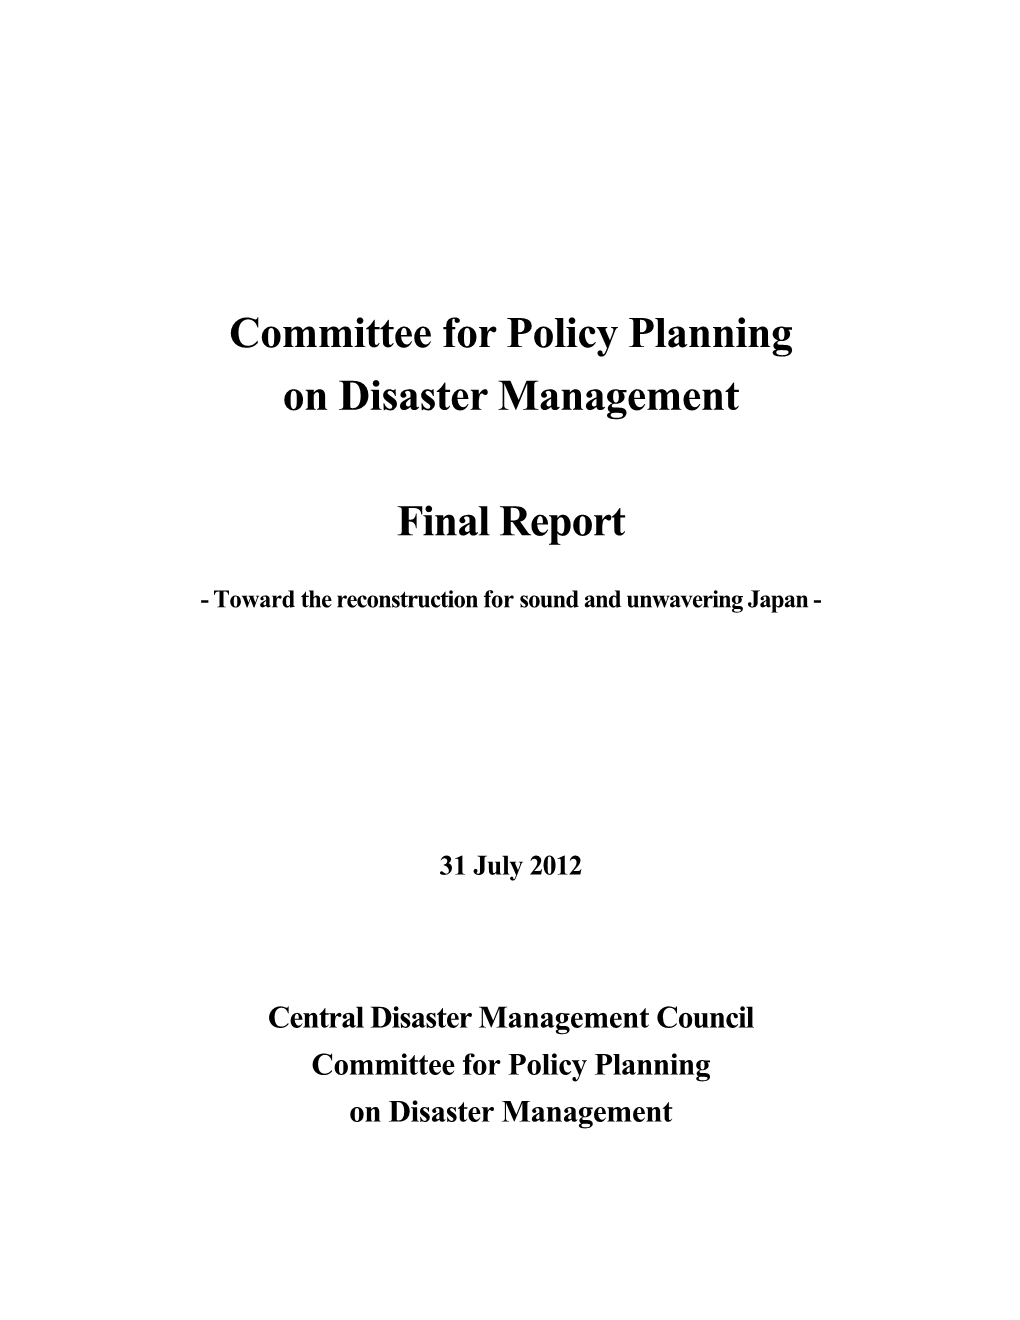 Committee for Policy Planning on Disaster Management